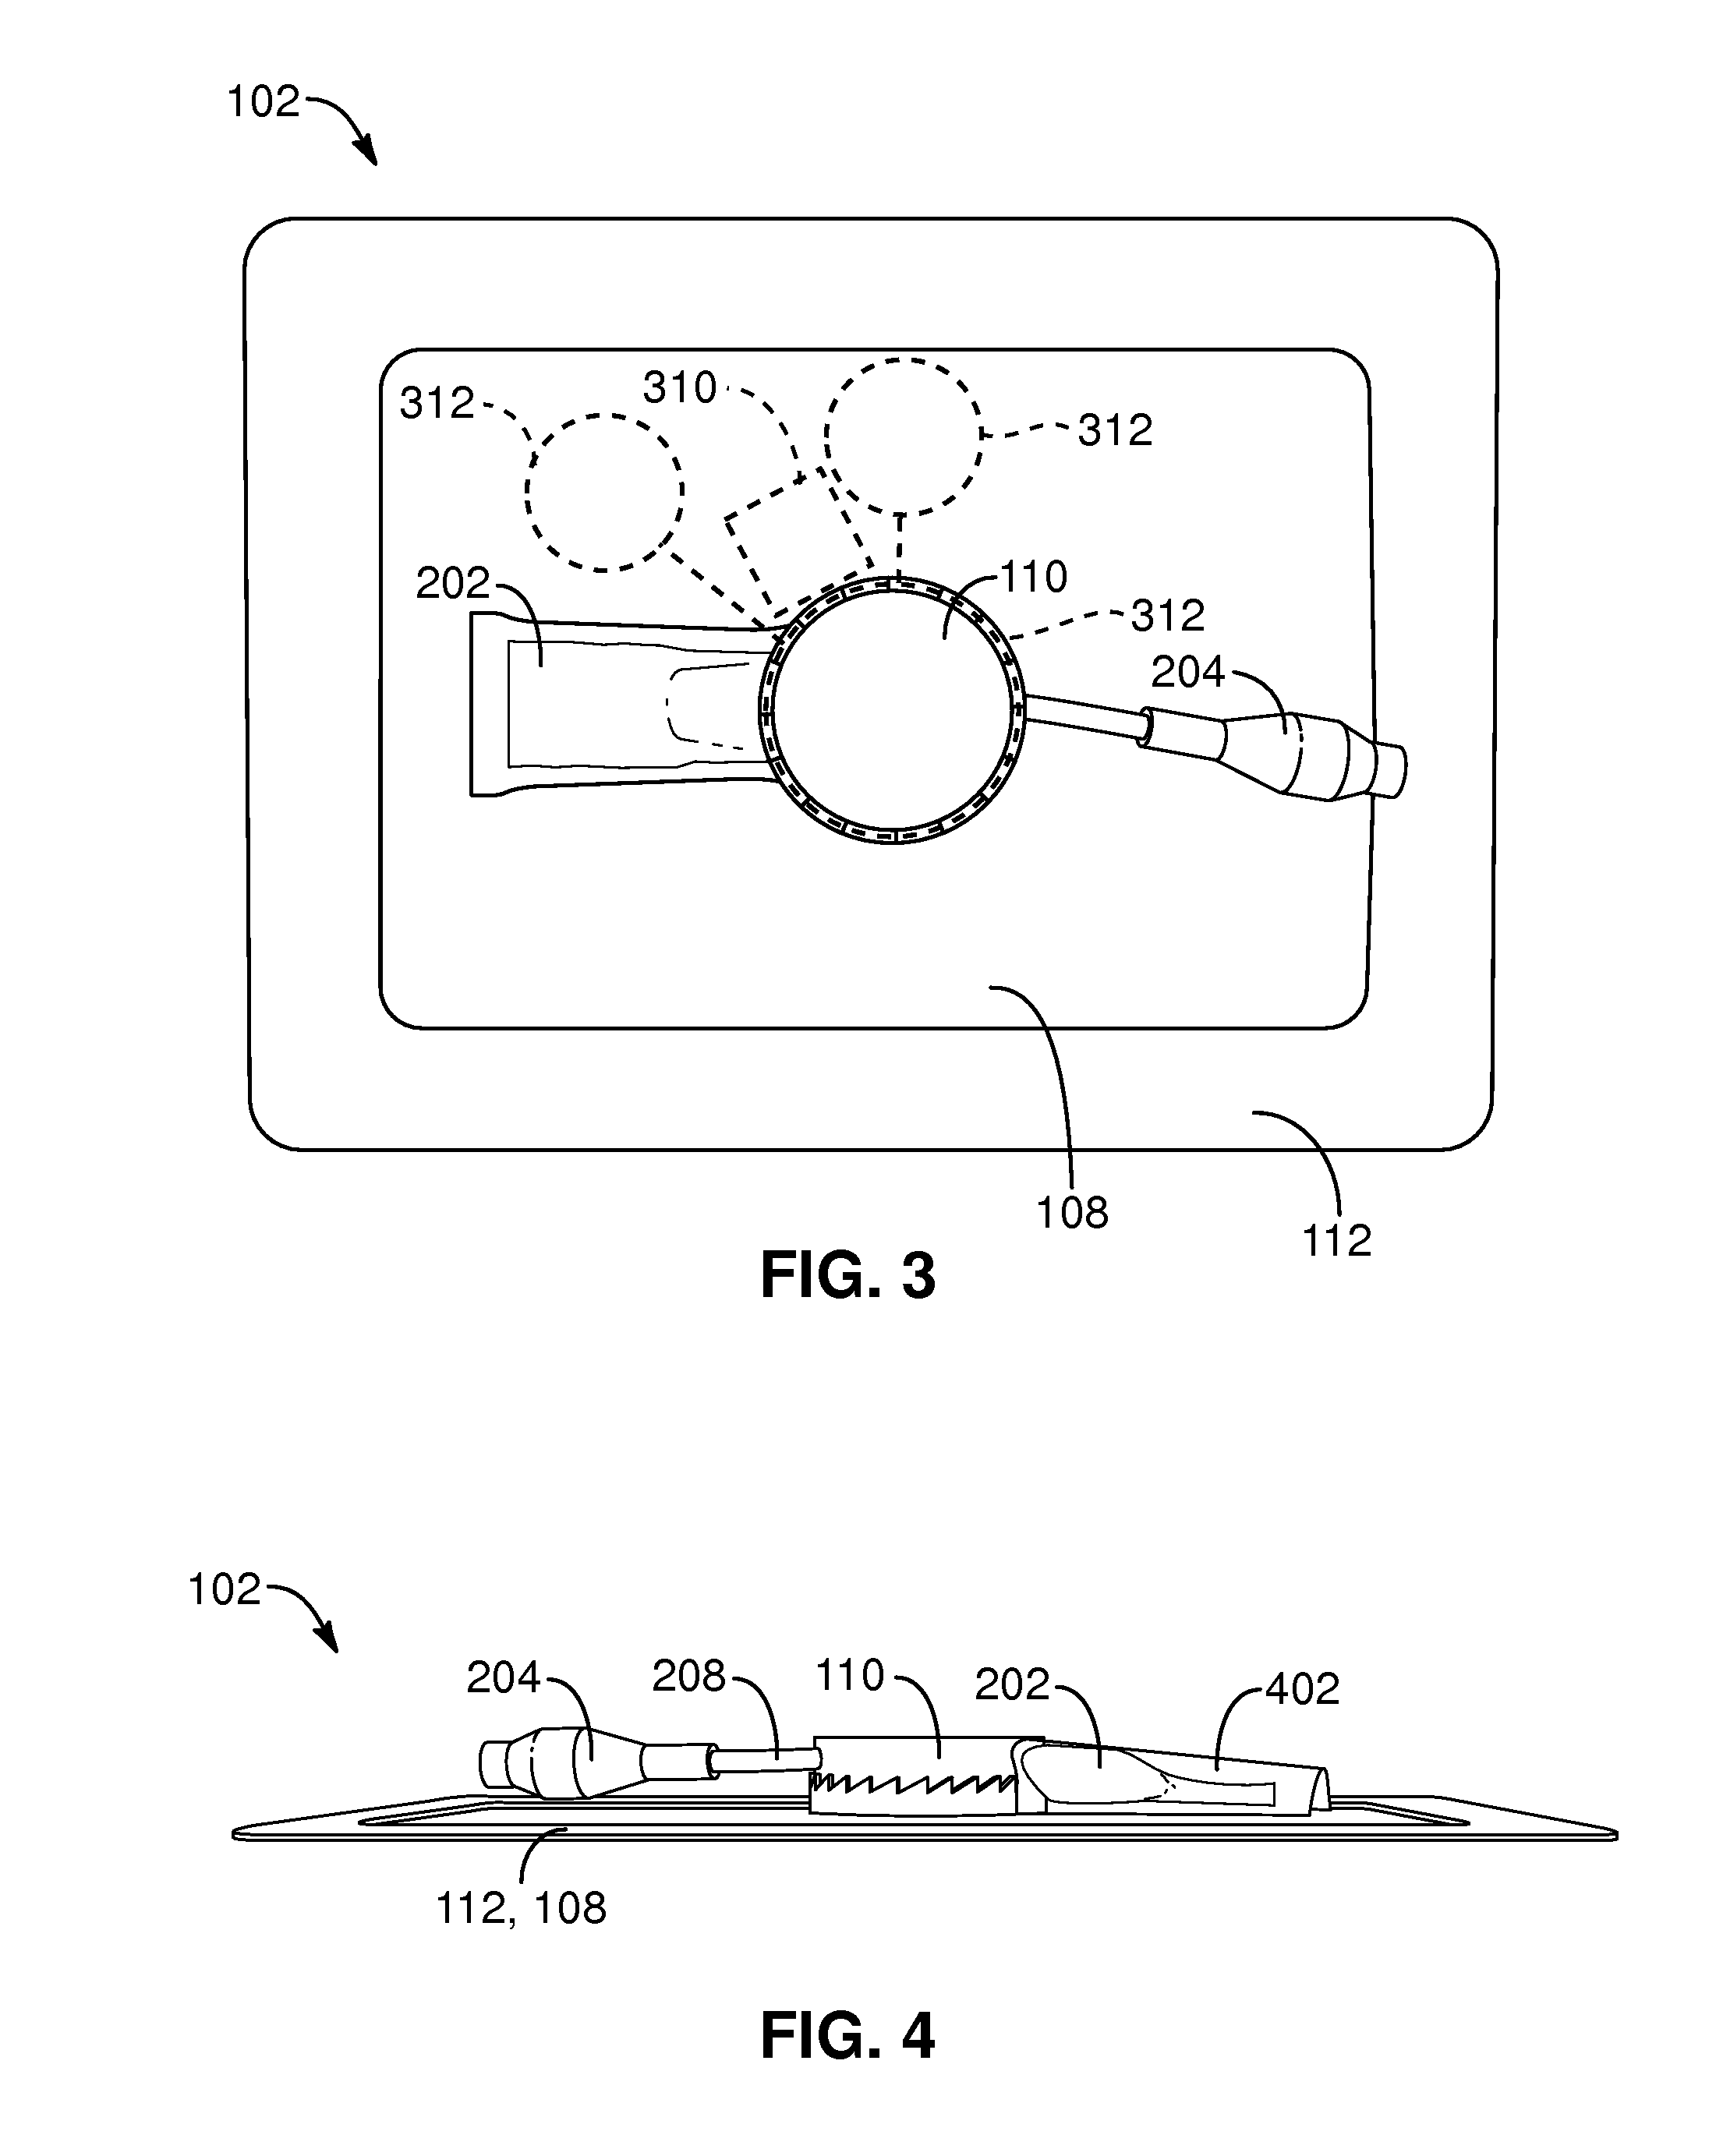 Apparatus, system, and method for protecting and treating a traumatic wound